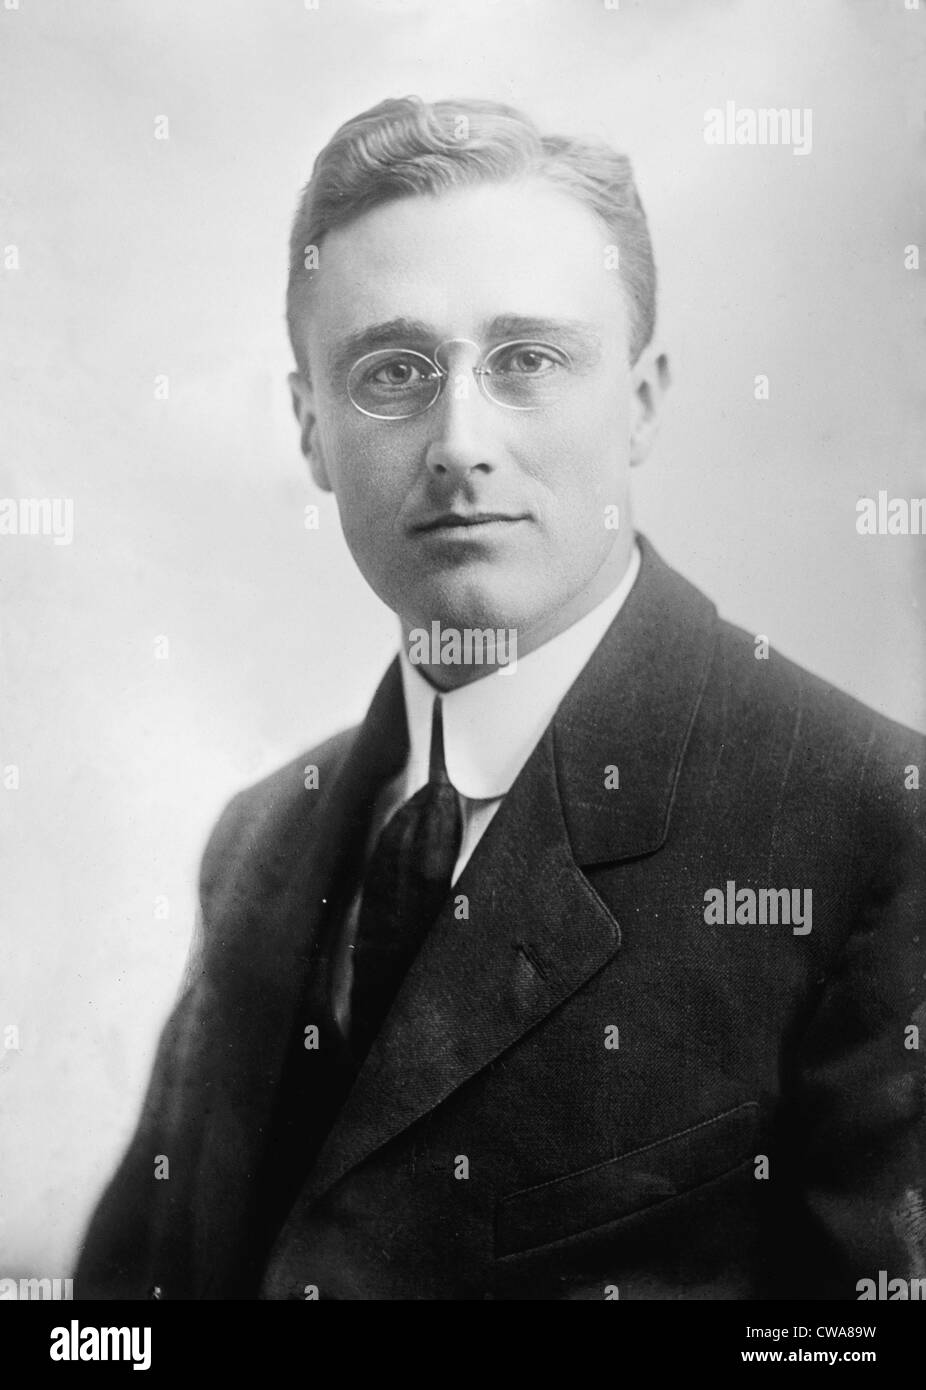 Portrait of a Franklin D. Roosevelt, probably taken when he was assistant secretary of the navy during World War I. Stock Photo